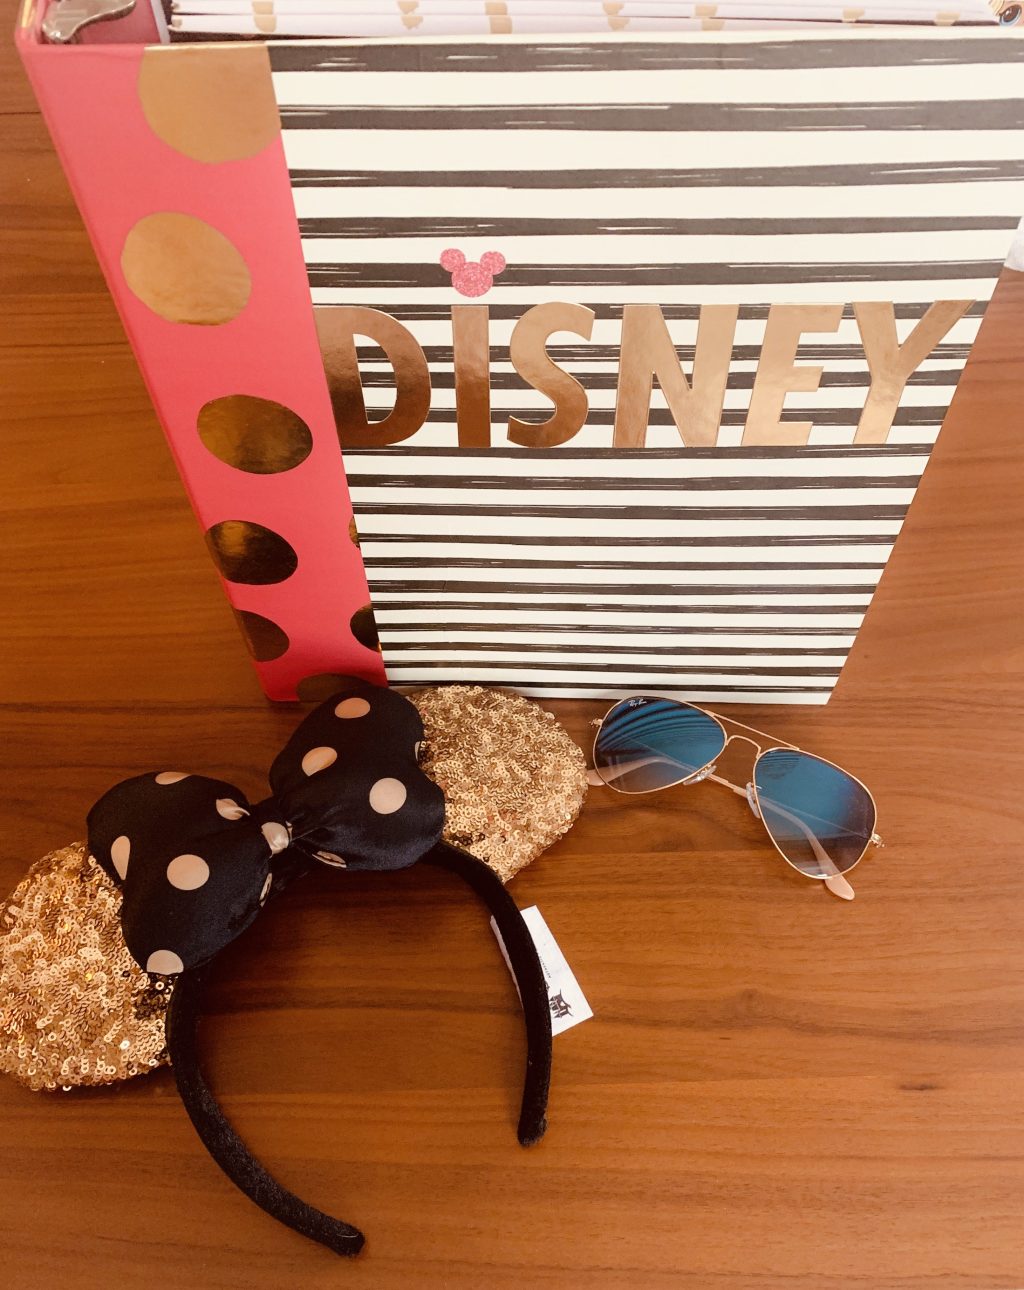 Prepping for Disney – Part 1